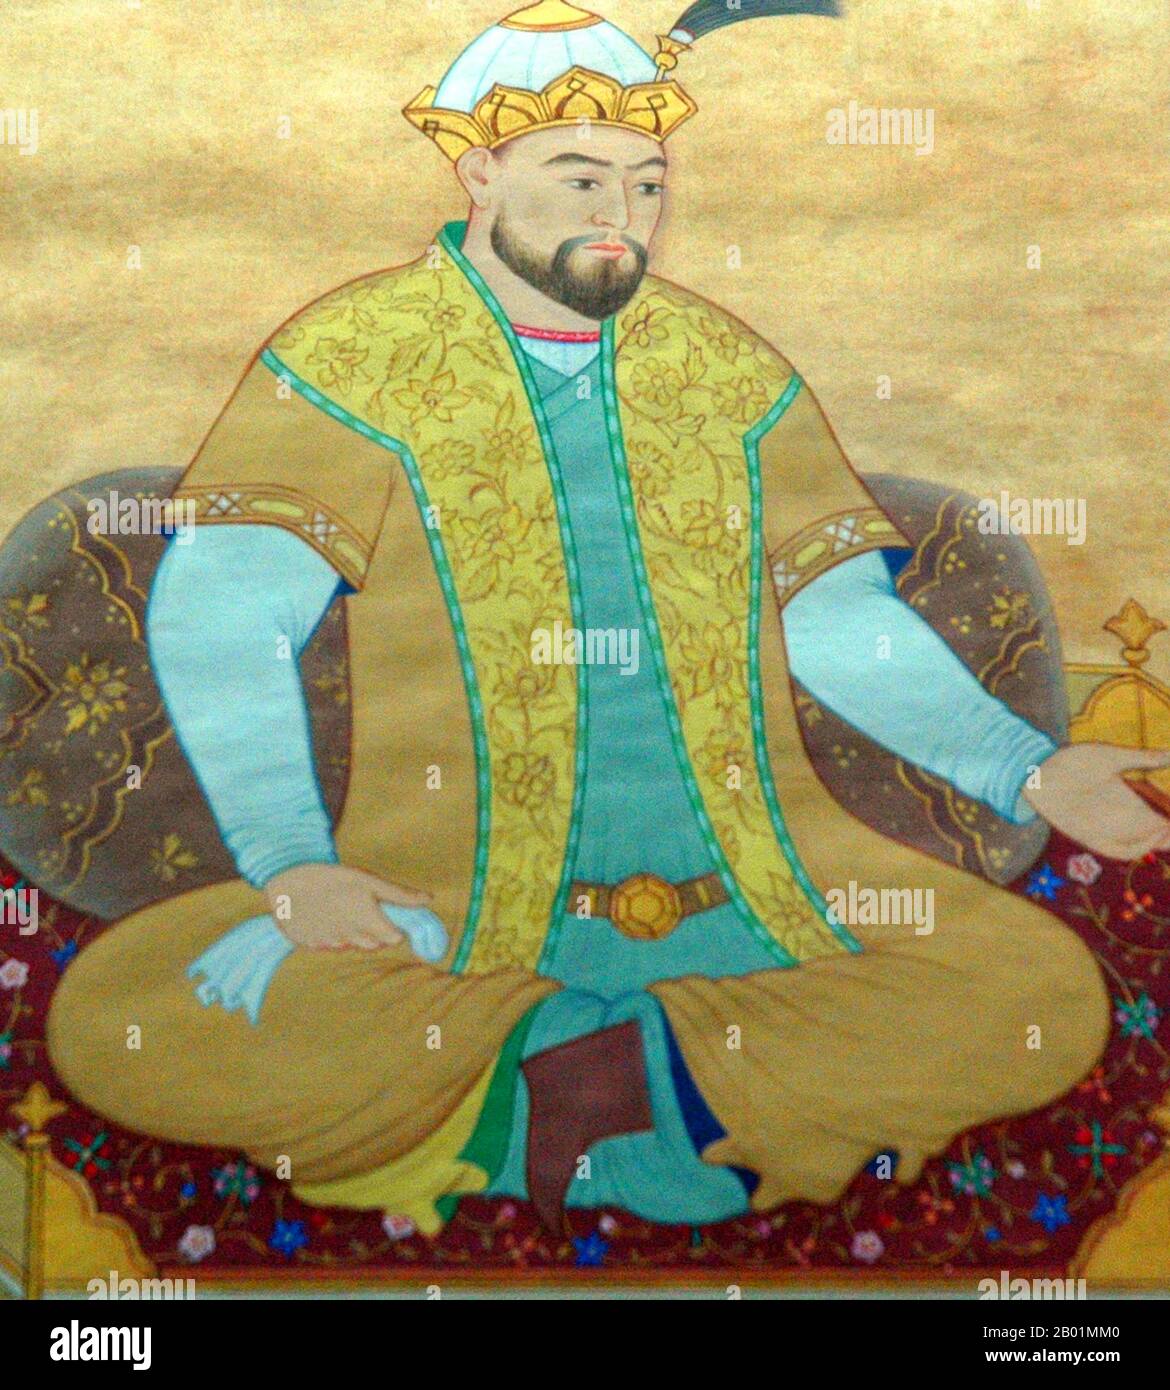 Iran/Uzbekistan: Ulugh Beg (22 March 1394 - 27 October 1449), astronomer. Miniature painting, c. 1453.  Ulugh Beg was a Timurid ruler as well as an astronomer, mathematician and sultan.  His commonly-known name is not truly a personal name, but can be loosely translated as 'Great Ruler'  and was the Turkic equivalent of Timur's Perso-Arabic title Amīr-e Kabīr. His real name was Mīrzā Mohammad Tāraghay bin Shāhrokh. Ulugh Beg was notable for his work in astronomy-related mathematics, such as trigonometry and spherical geometry. He built the great observatory in Samarkand, between 1424 and 1429. Stock Photo